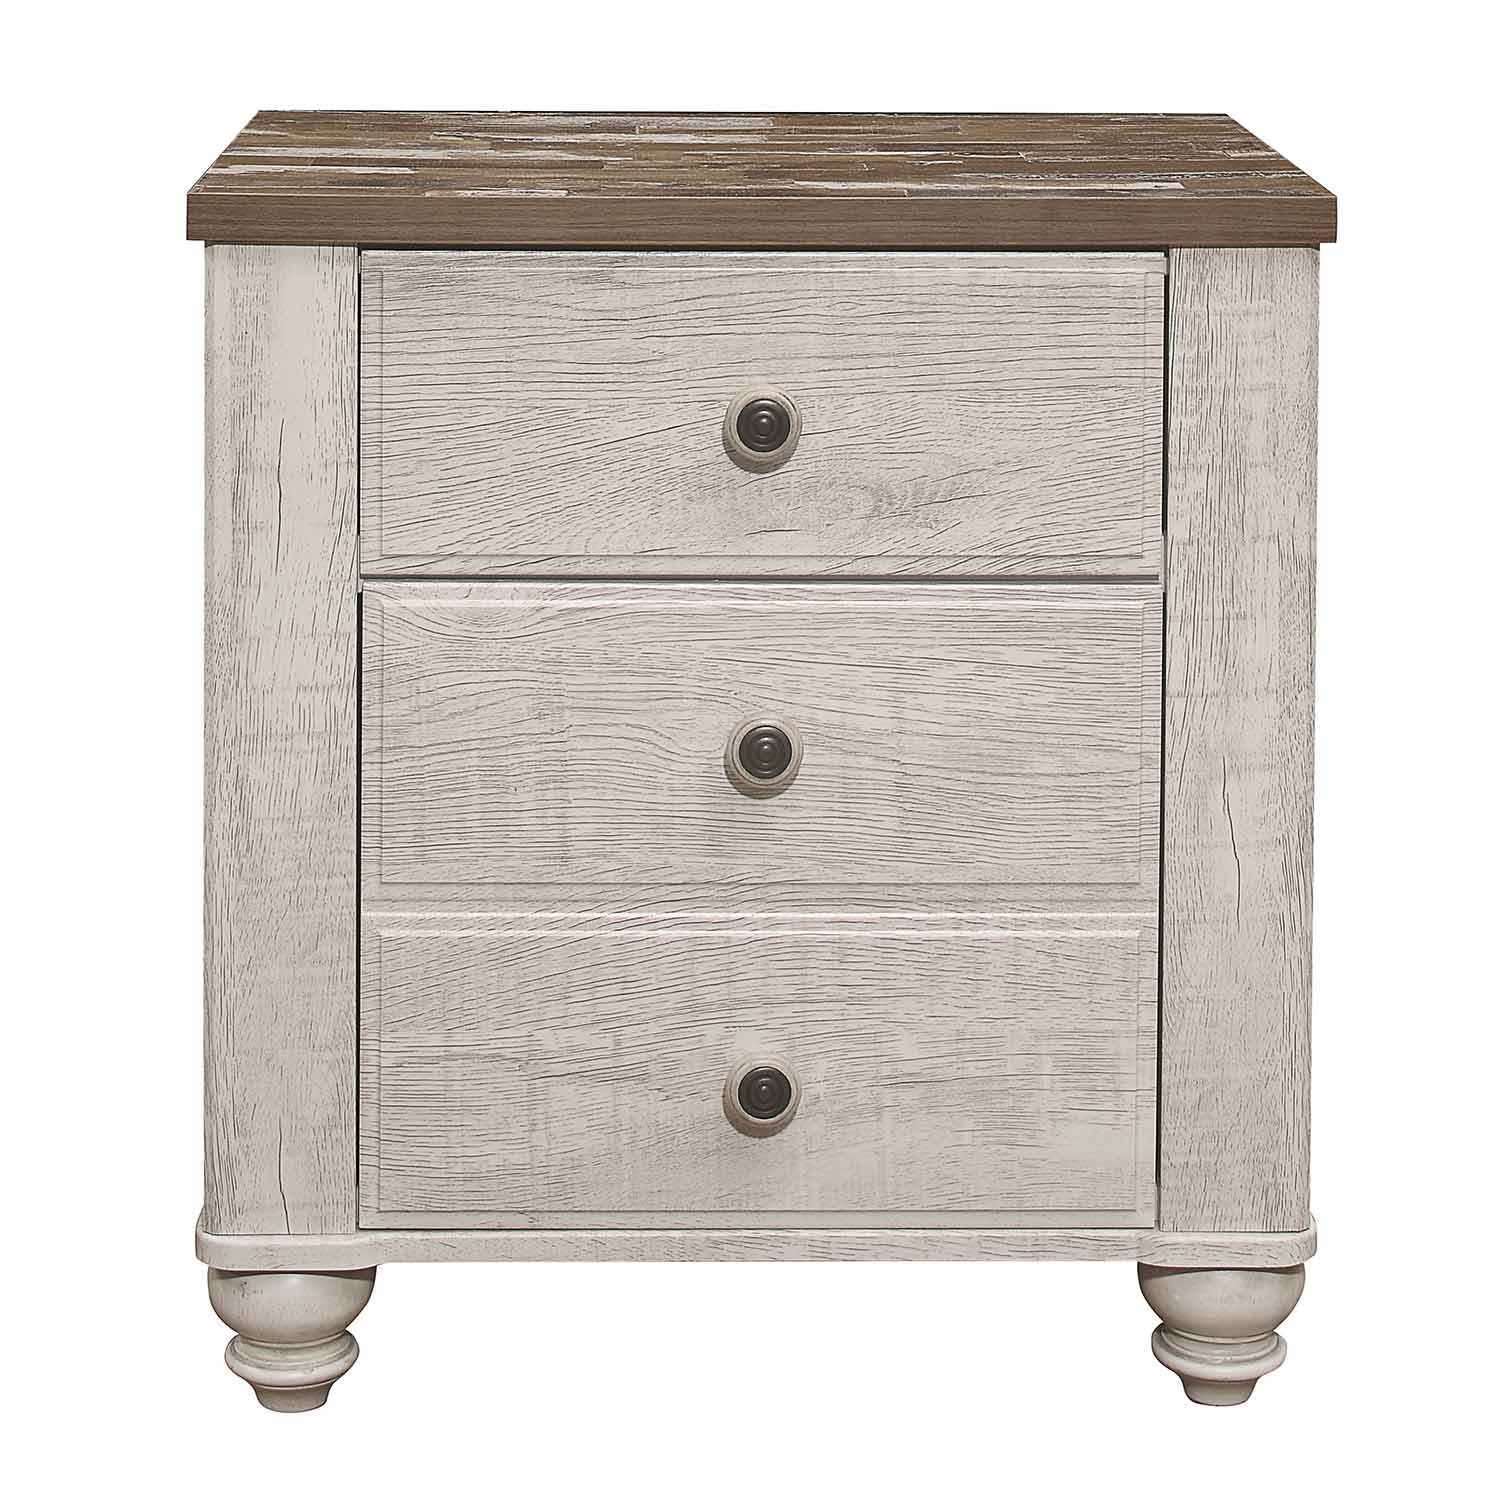 Homelegance Nashville Night Stand - Antique White and Brown